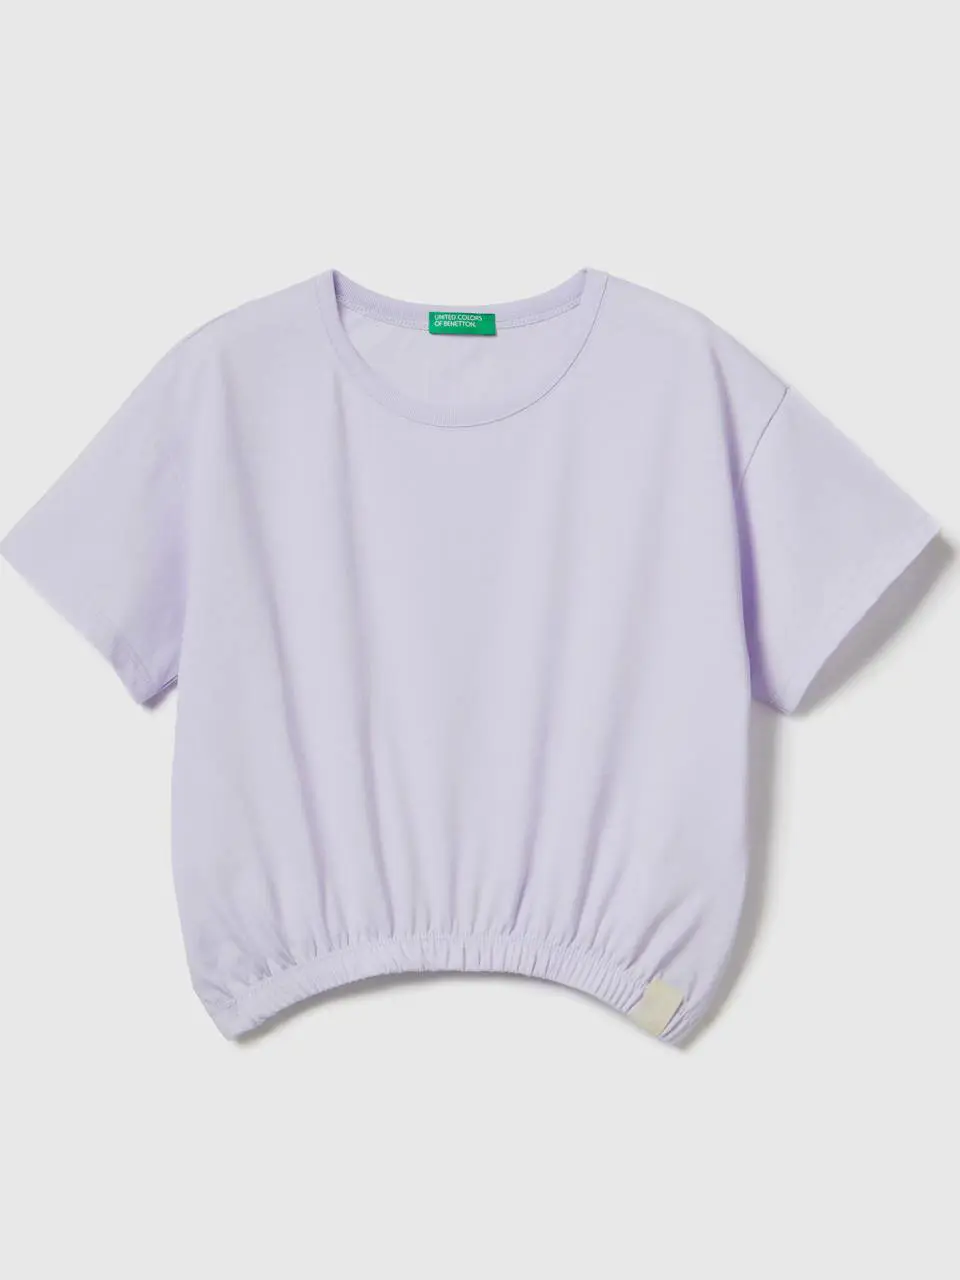 Benetton boxy fit t-shirt in recycled fabric. 1